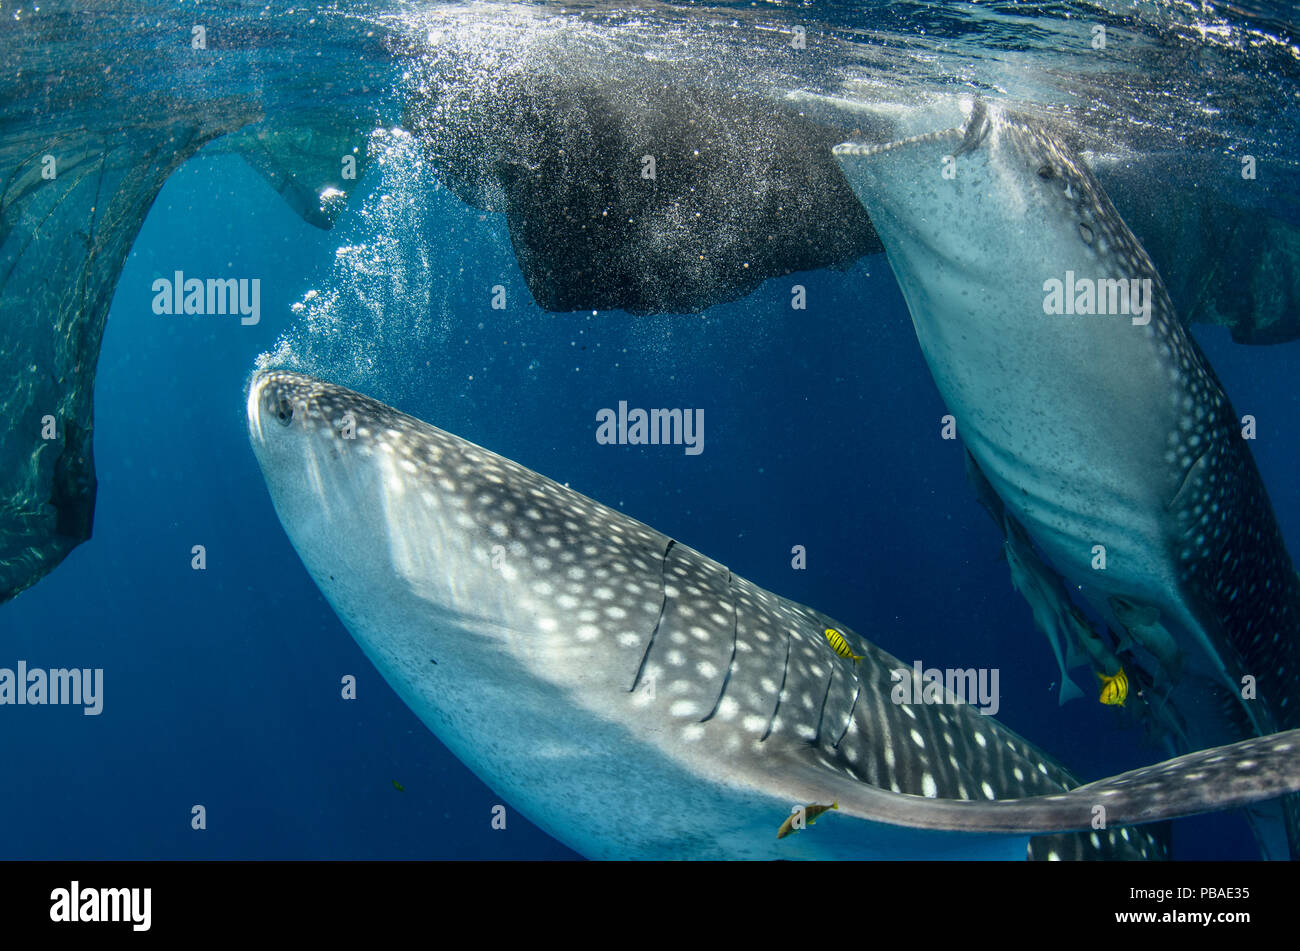 Whale sharks (Rhincodon typus) feeding at Bagan (floating fishing platform) Cenderawasih Bay, West Papua, Indonesia. Bagan fishermen see whale sharks as good luck and often feed them baitfish. This is now developing into a tourist attraction Stock Photo